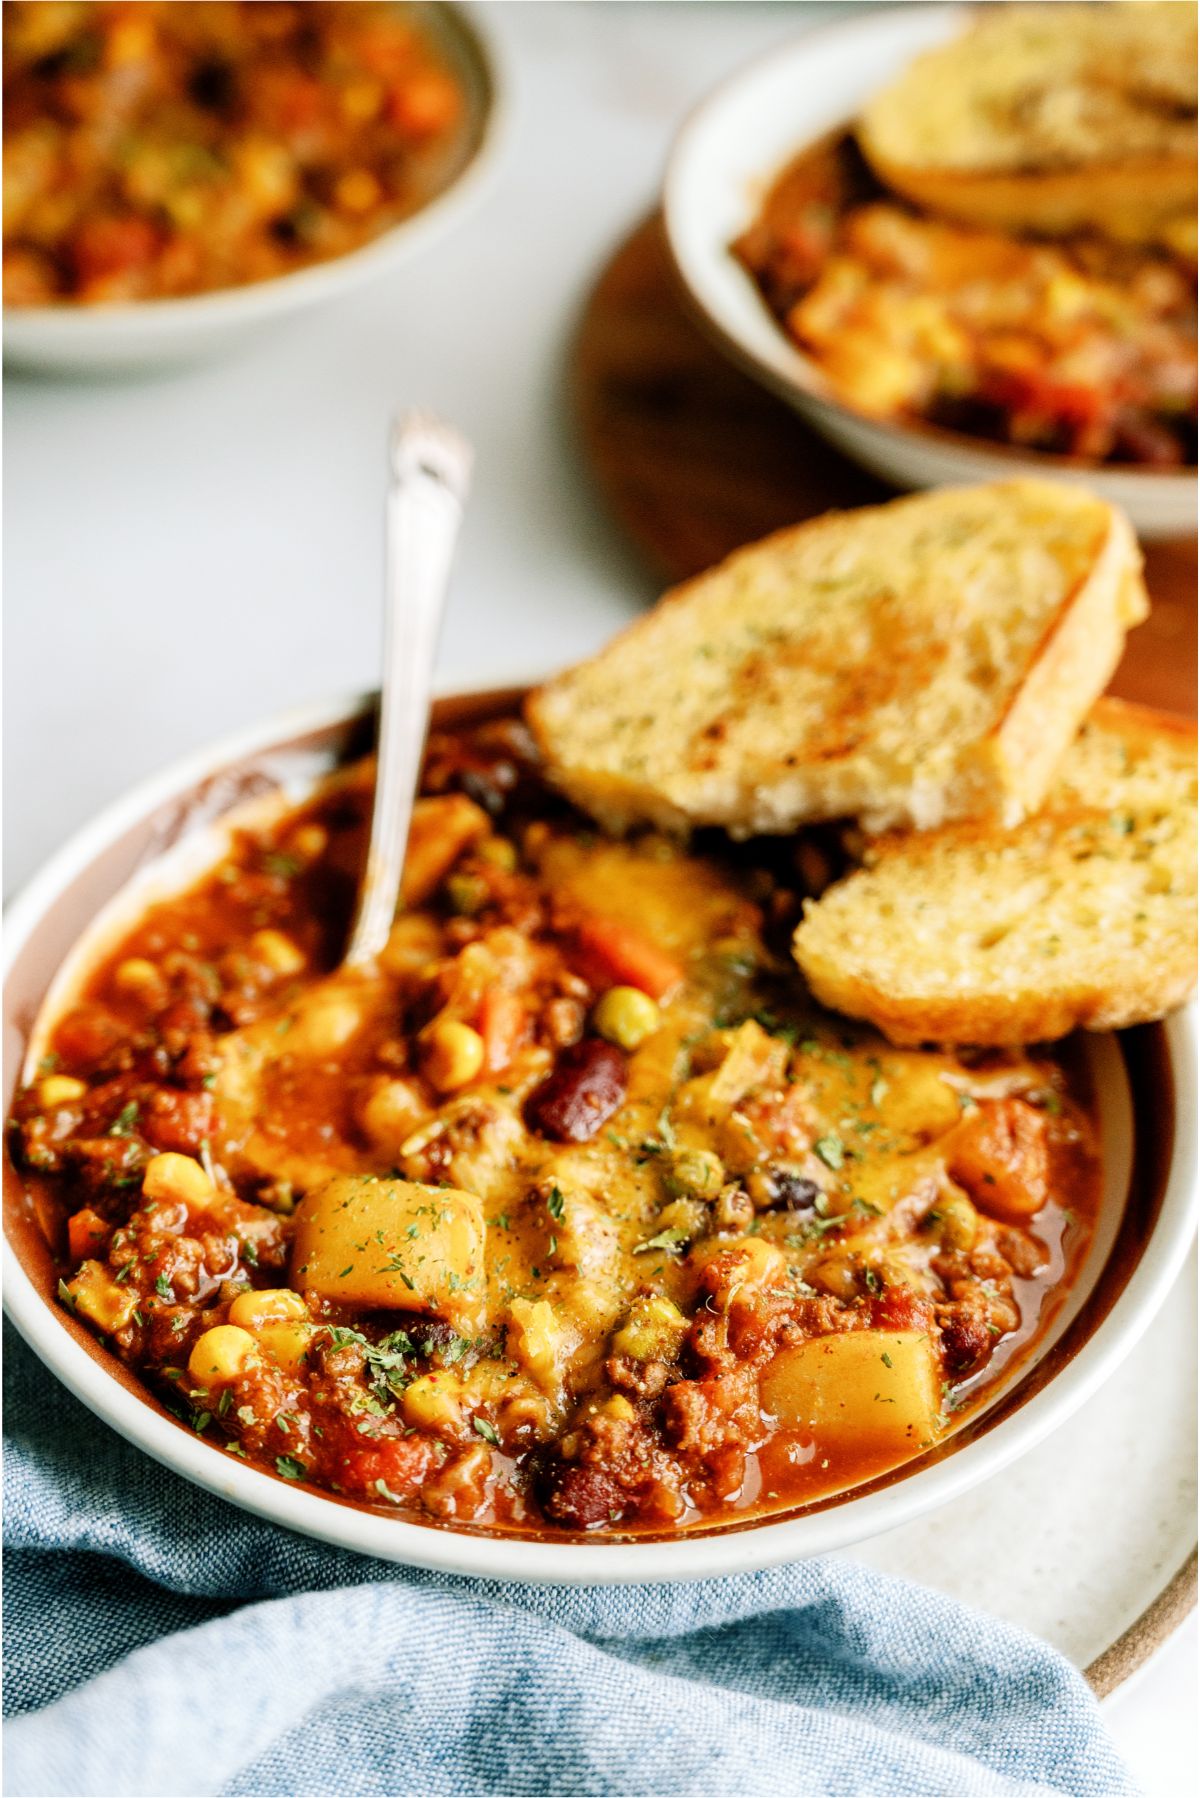 Bowls of Shepherd's Pie Chili with bread on the side